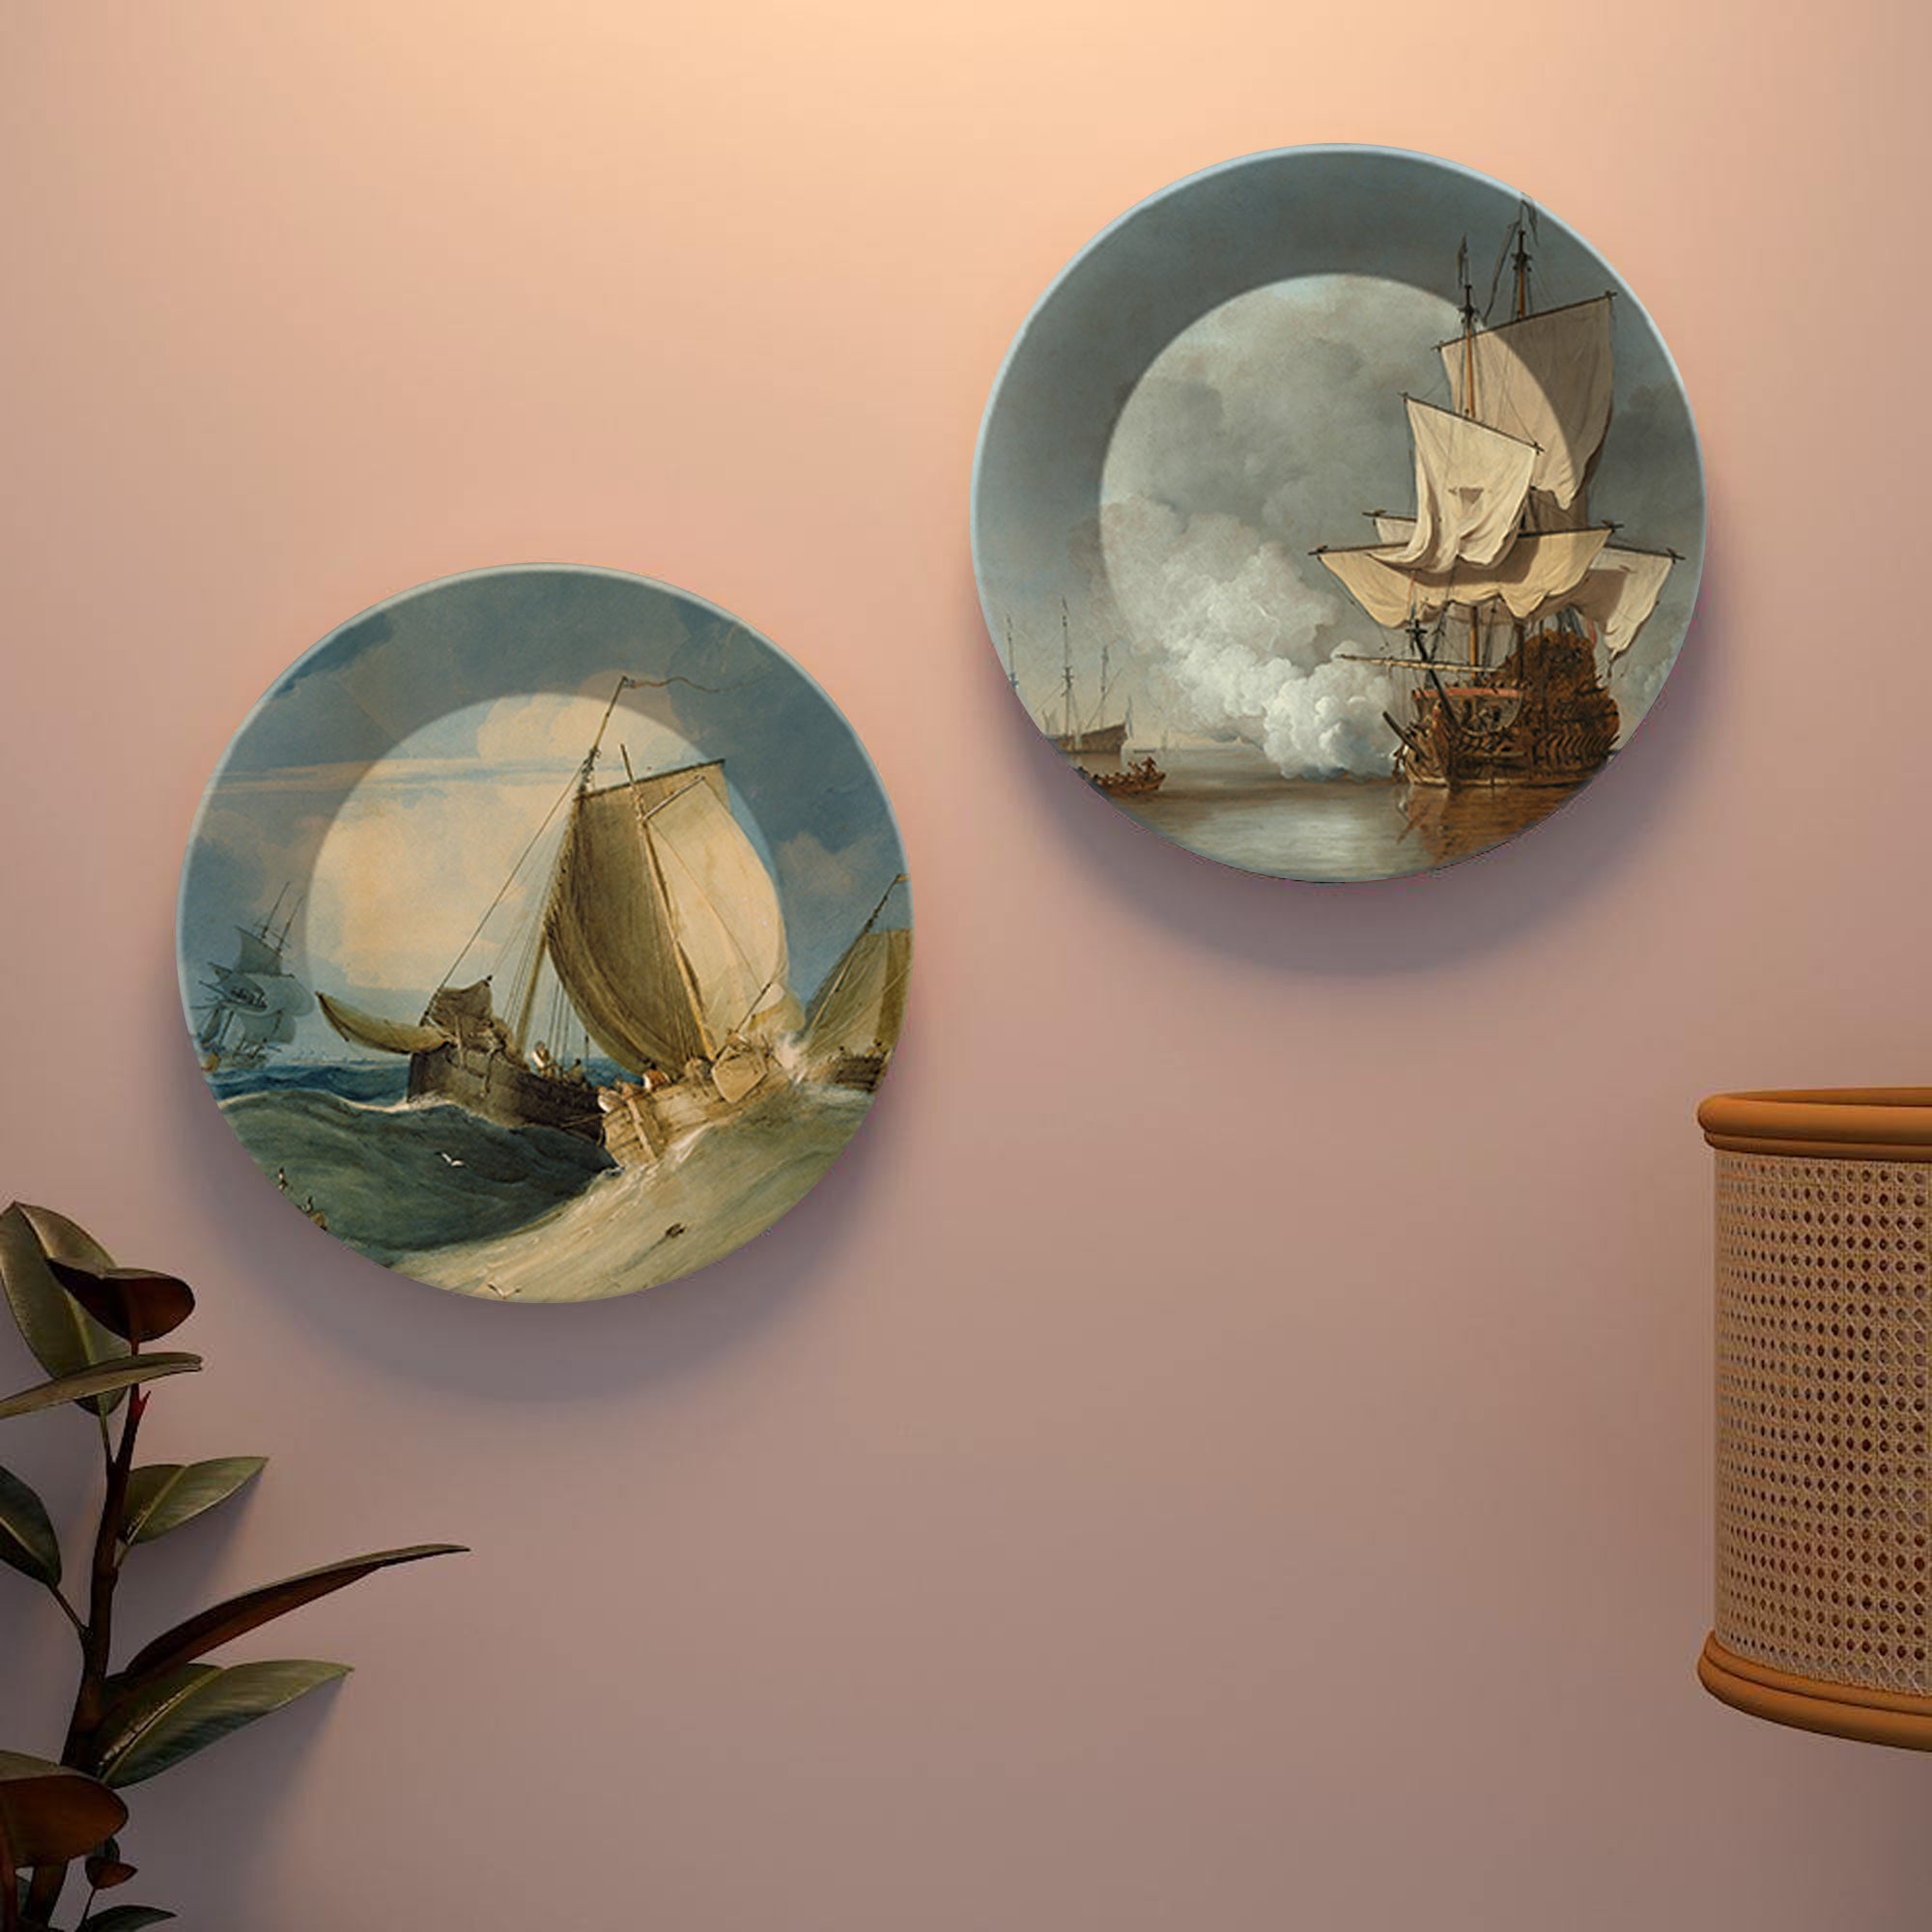  Ceramic Wall Hanging Plates of Two Pieces